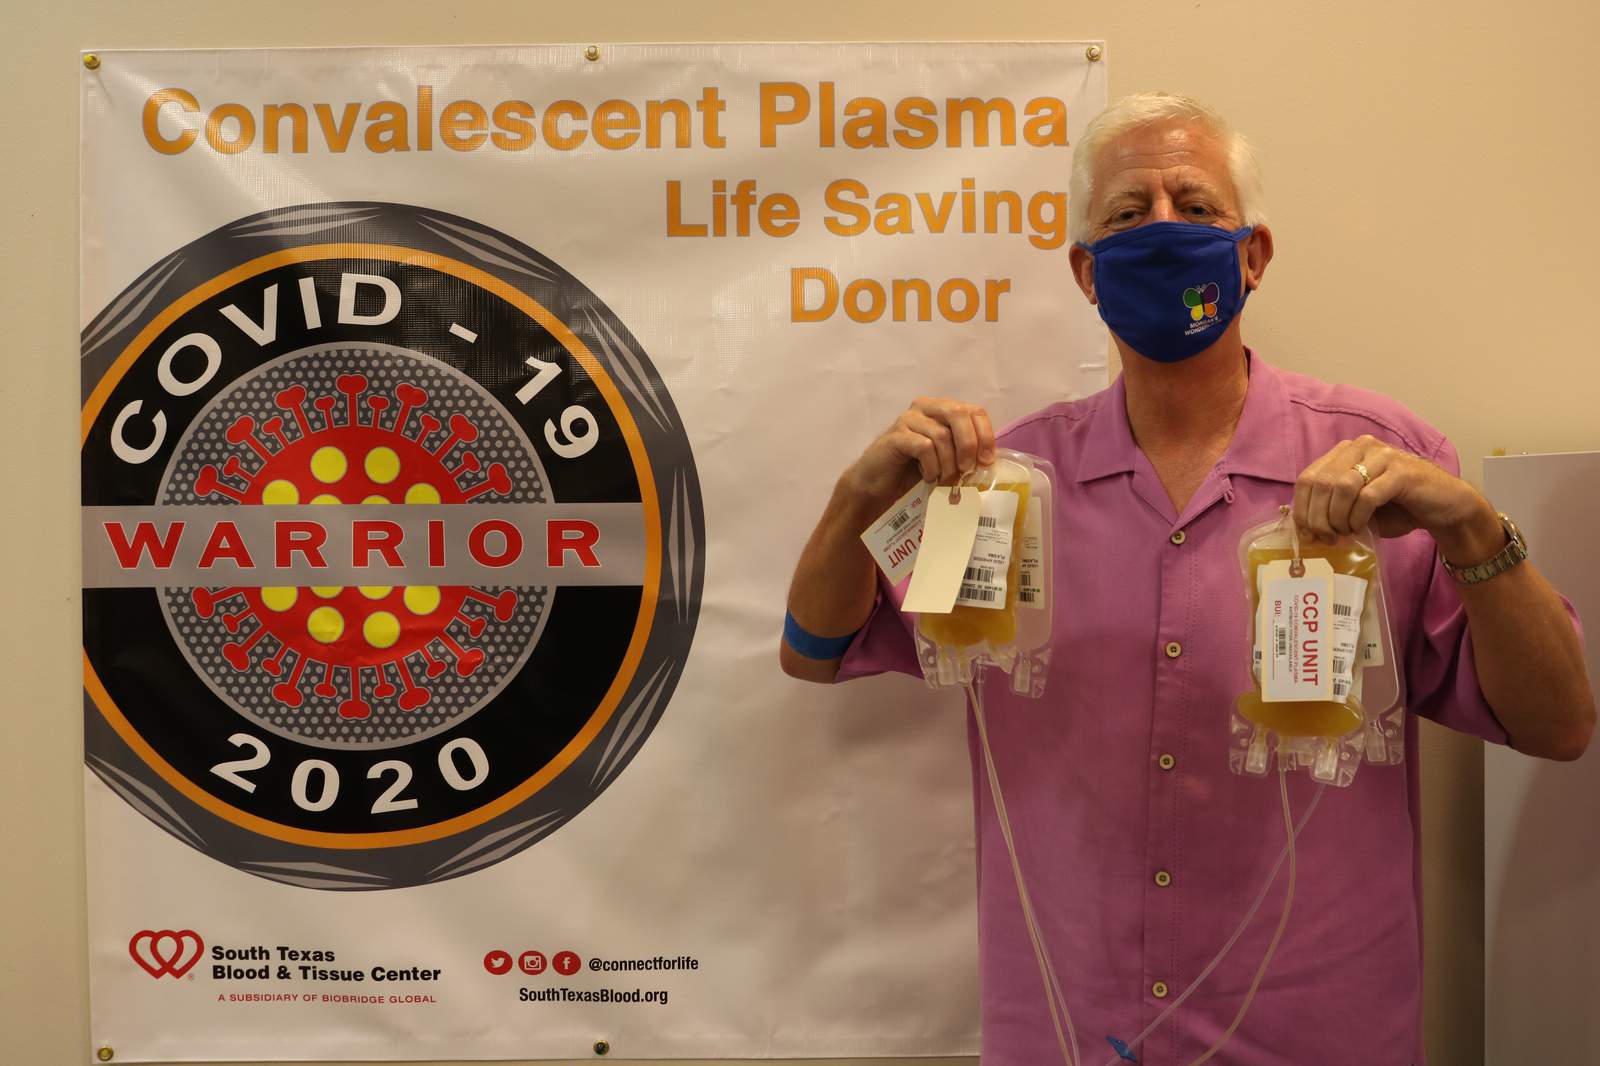 Morgans Wonderland founder, executive donate plasma at South Texas Blood & Tissue Center after recovering from COVID-19